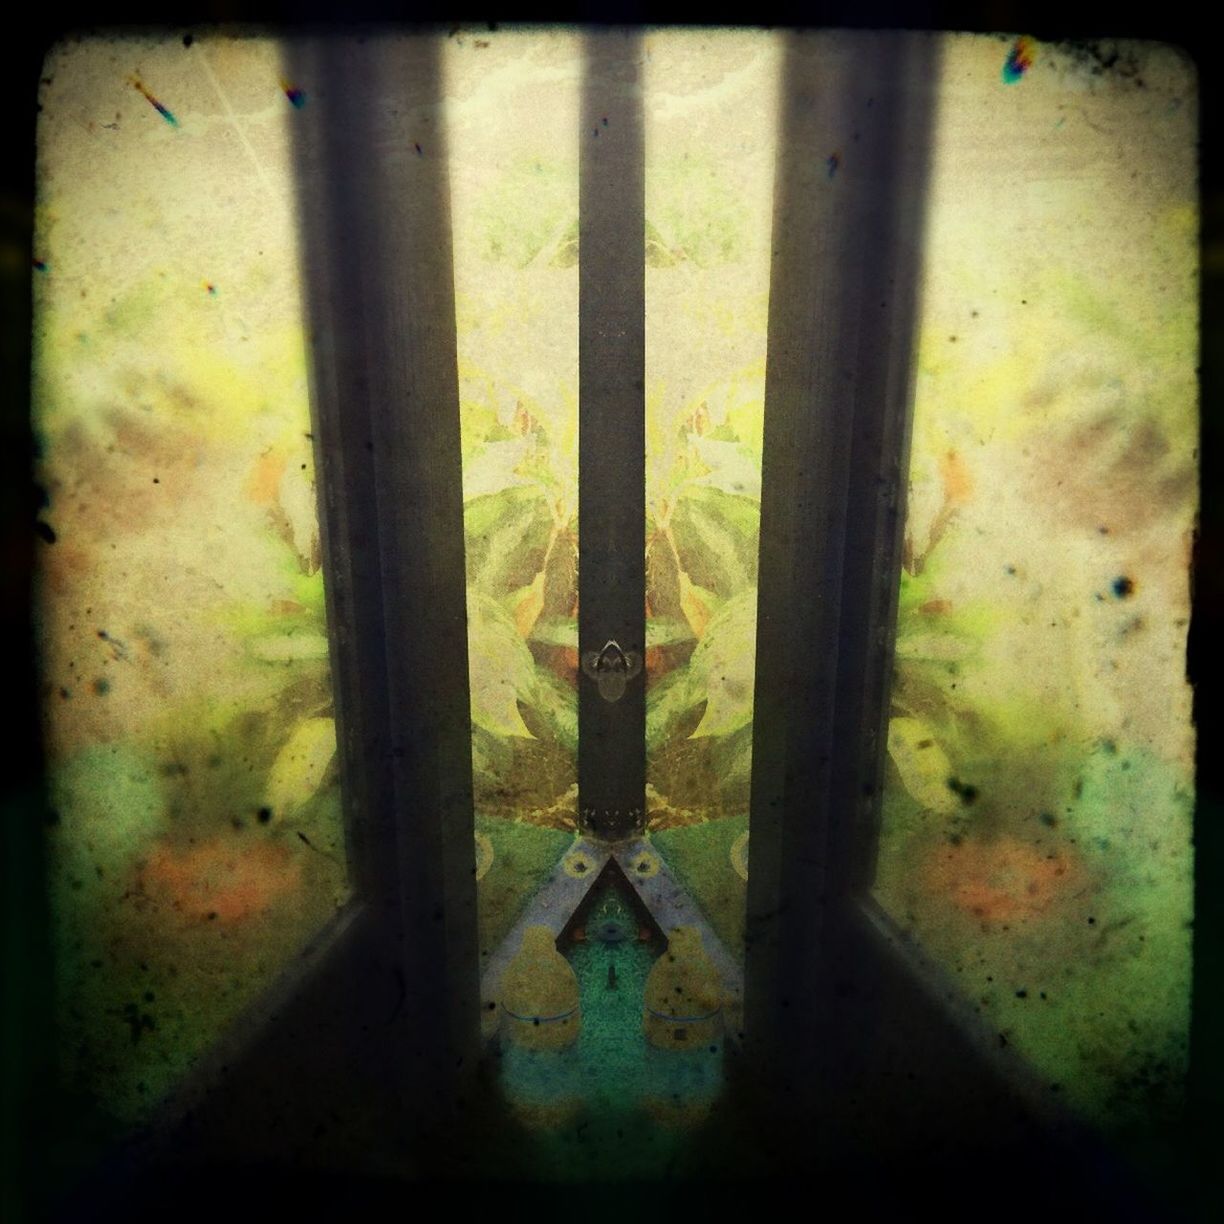 metal, window, no people, indoors, auto post production filter, control, transfer print, spooky, glass, rusty, building, punishment, day, close-up, architecture, nature, prison, gate, grid